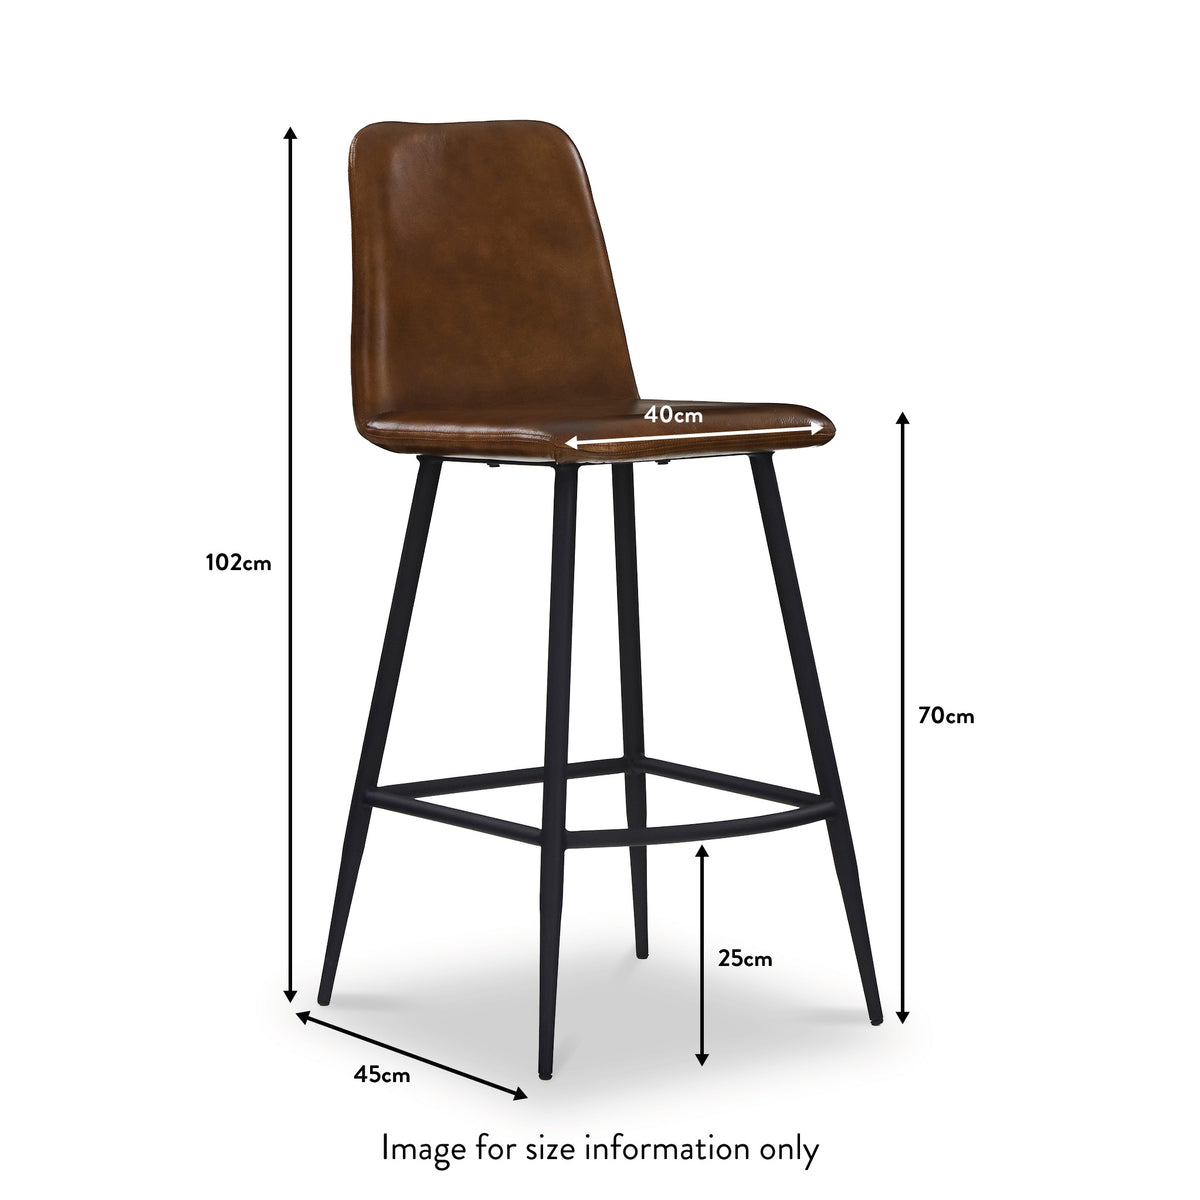 Ally Leather Stool from Roseland